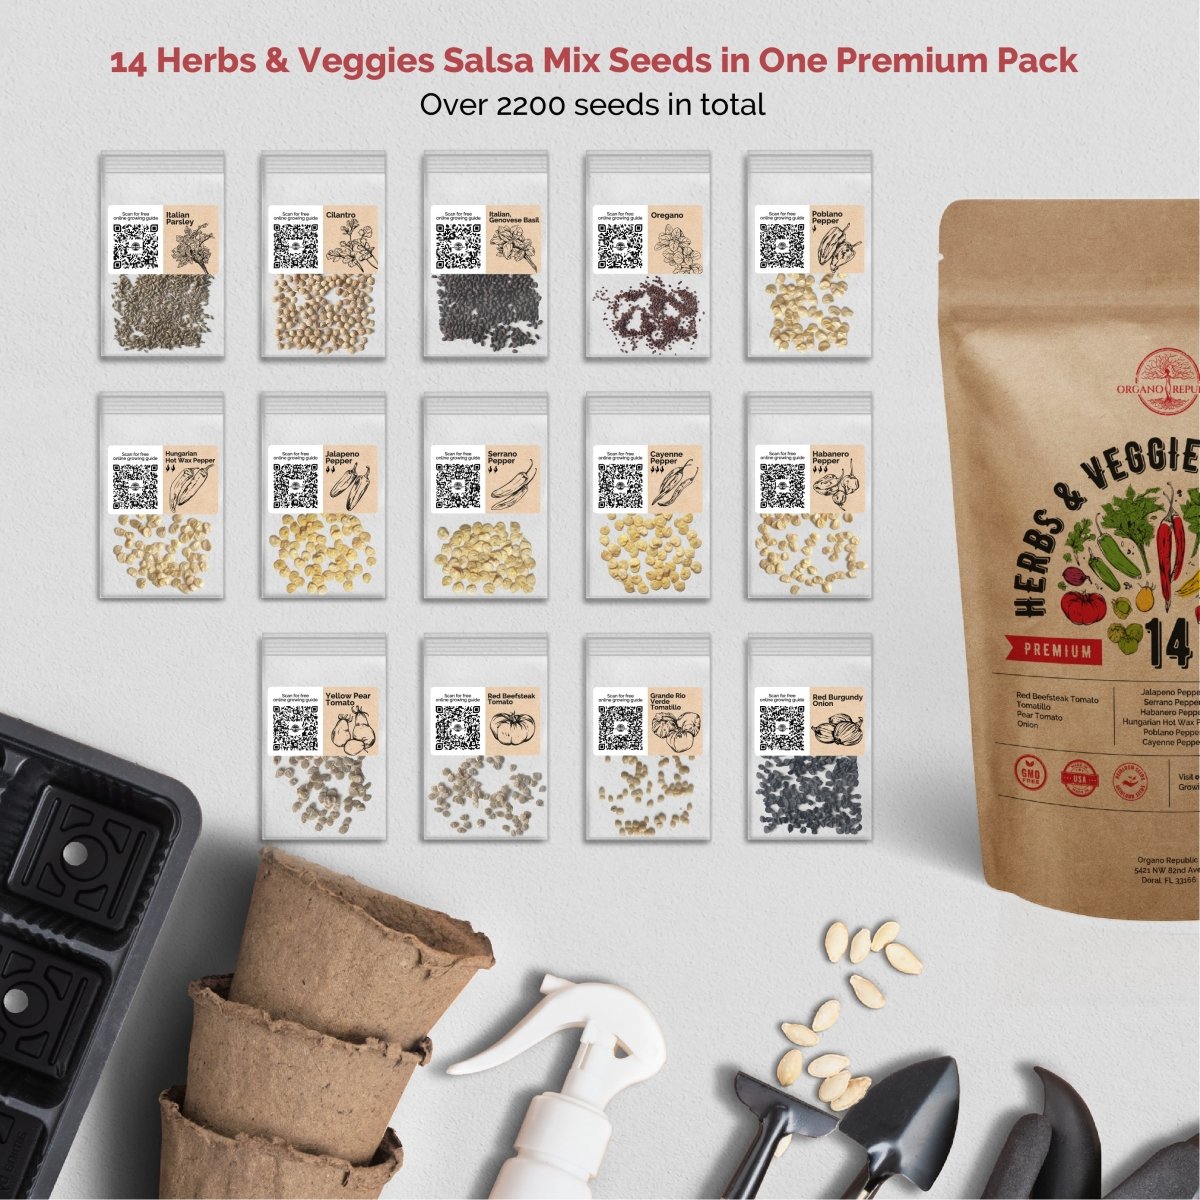 14 Herb, Tomato & Chili Pepper and 20 Most Popular Vegetable Seeds Bundle - Organo Republic